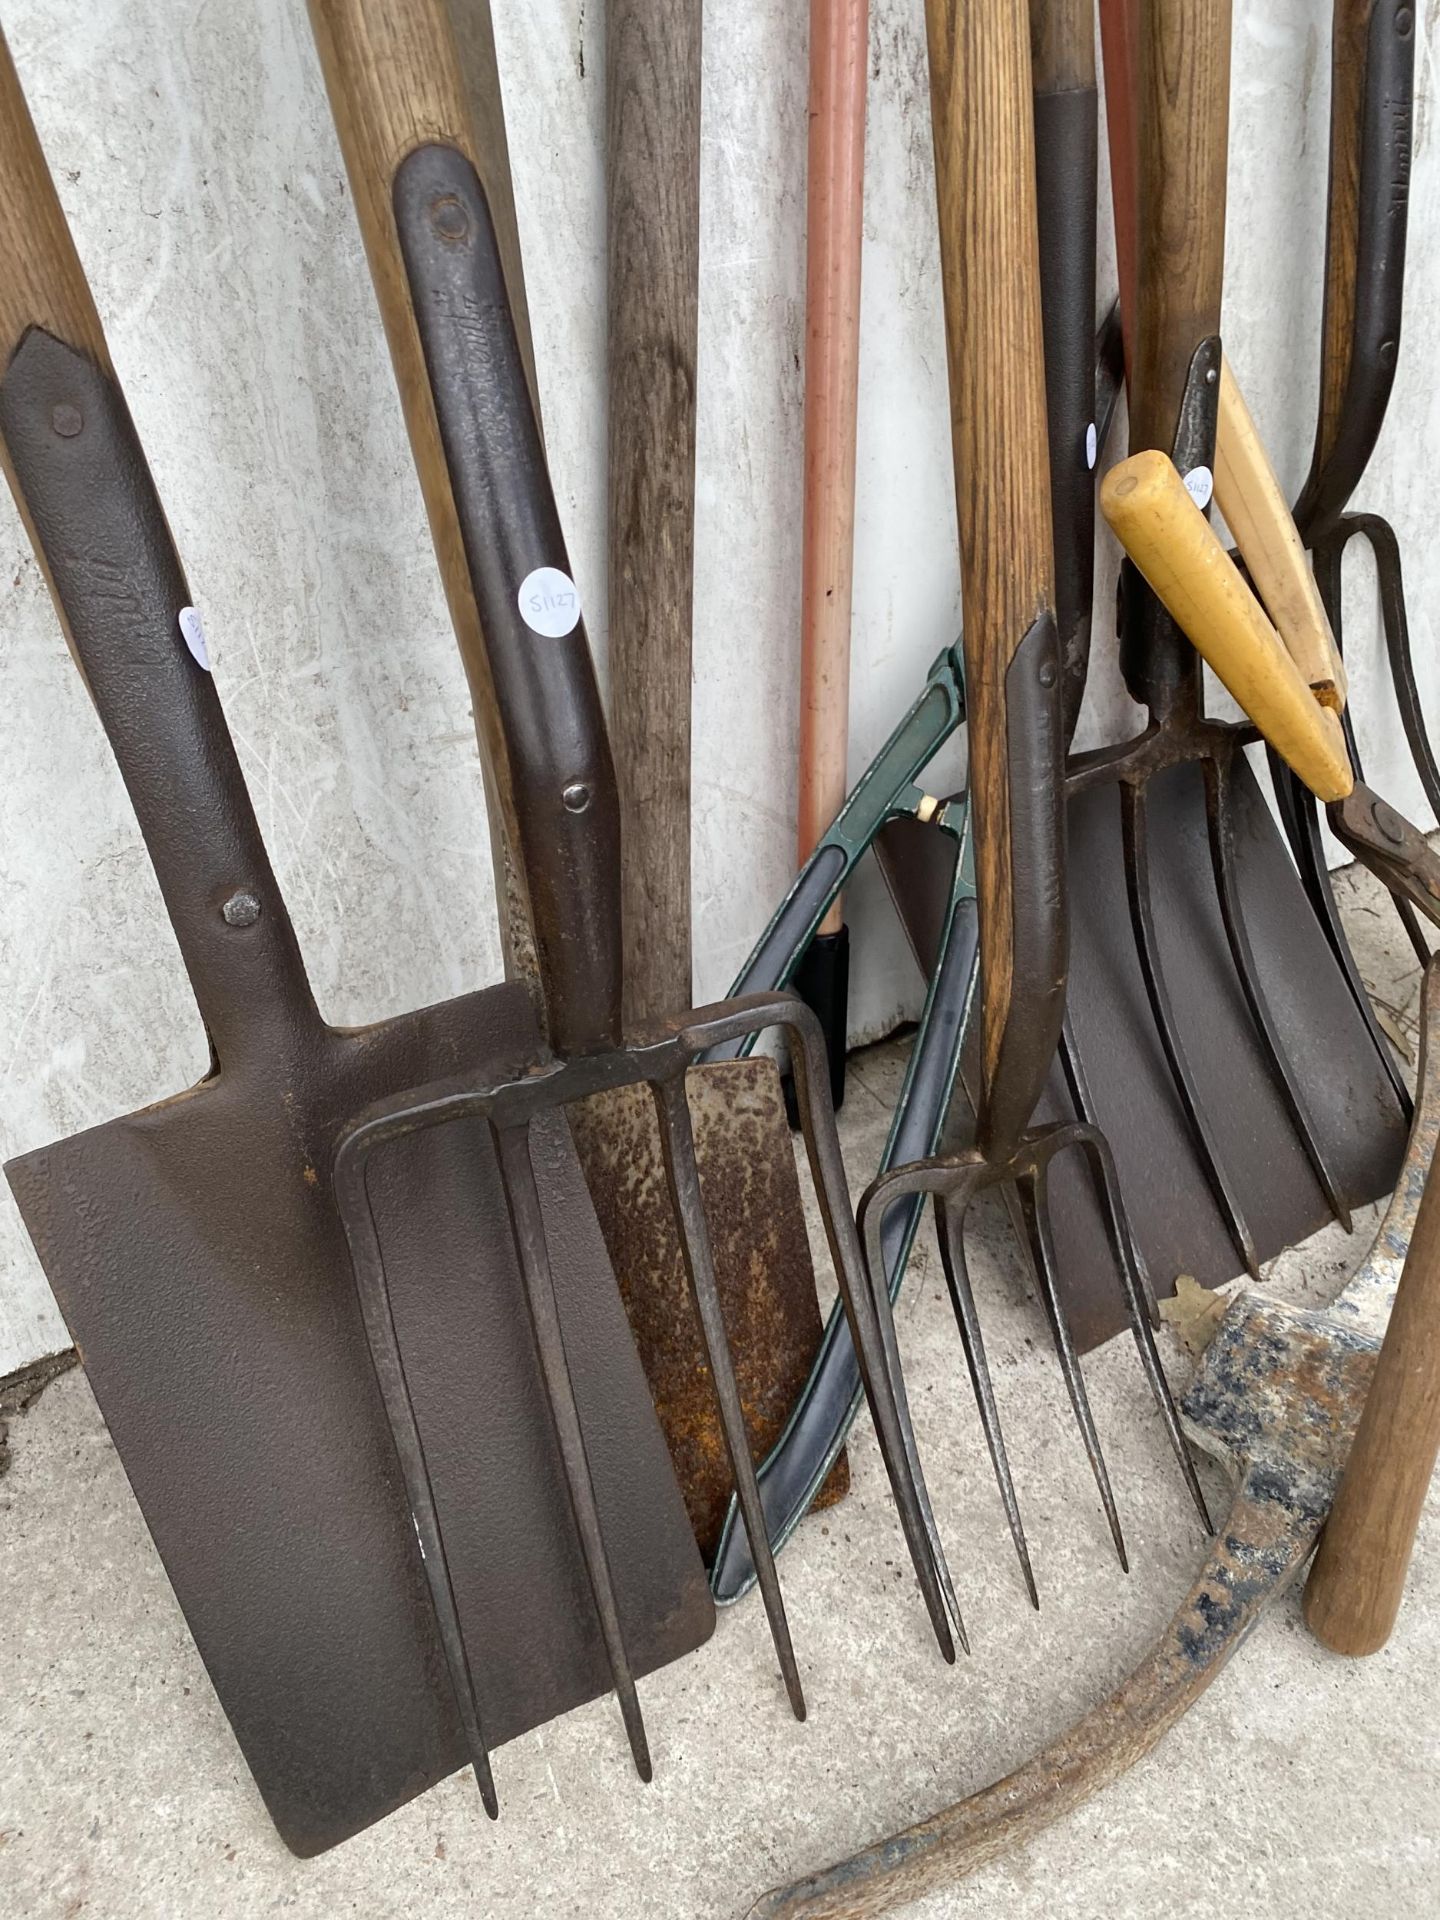 AN ASSORTMENT OF GARDEN TOOLS TO INCLUDE FORKS, SPADES AND A SHOVEL ETC - Image 3 of 3